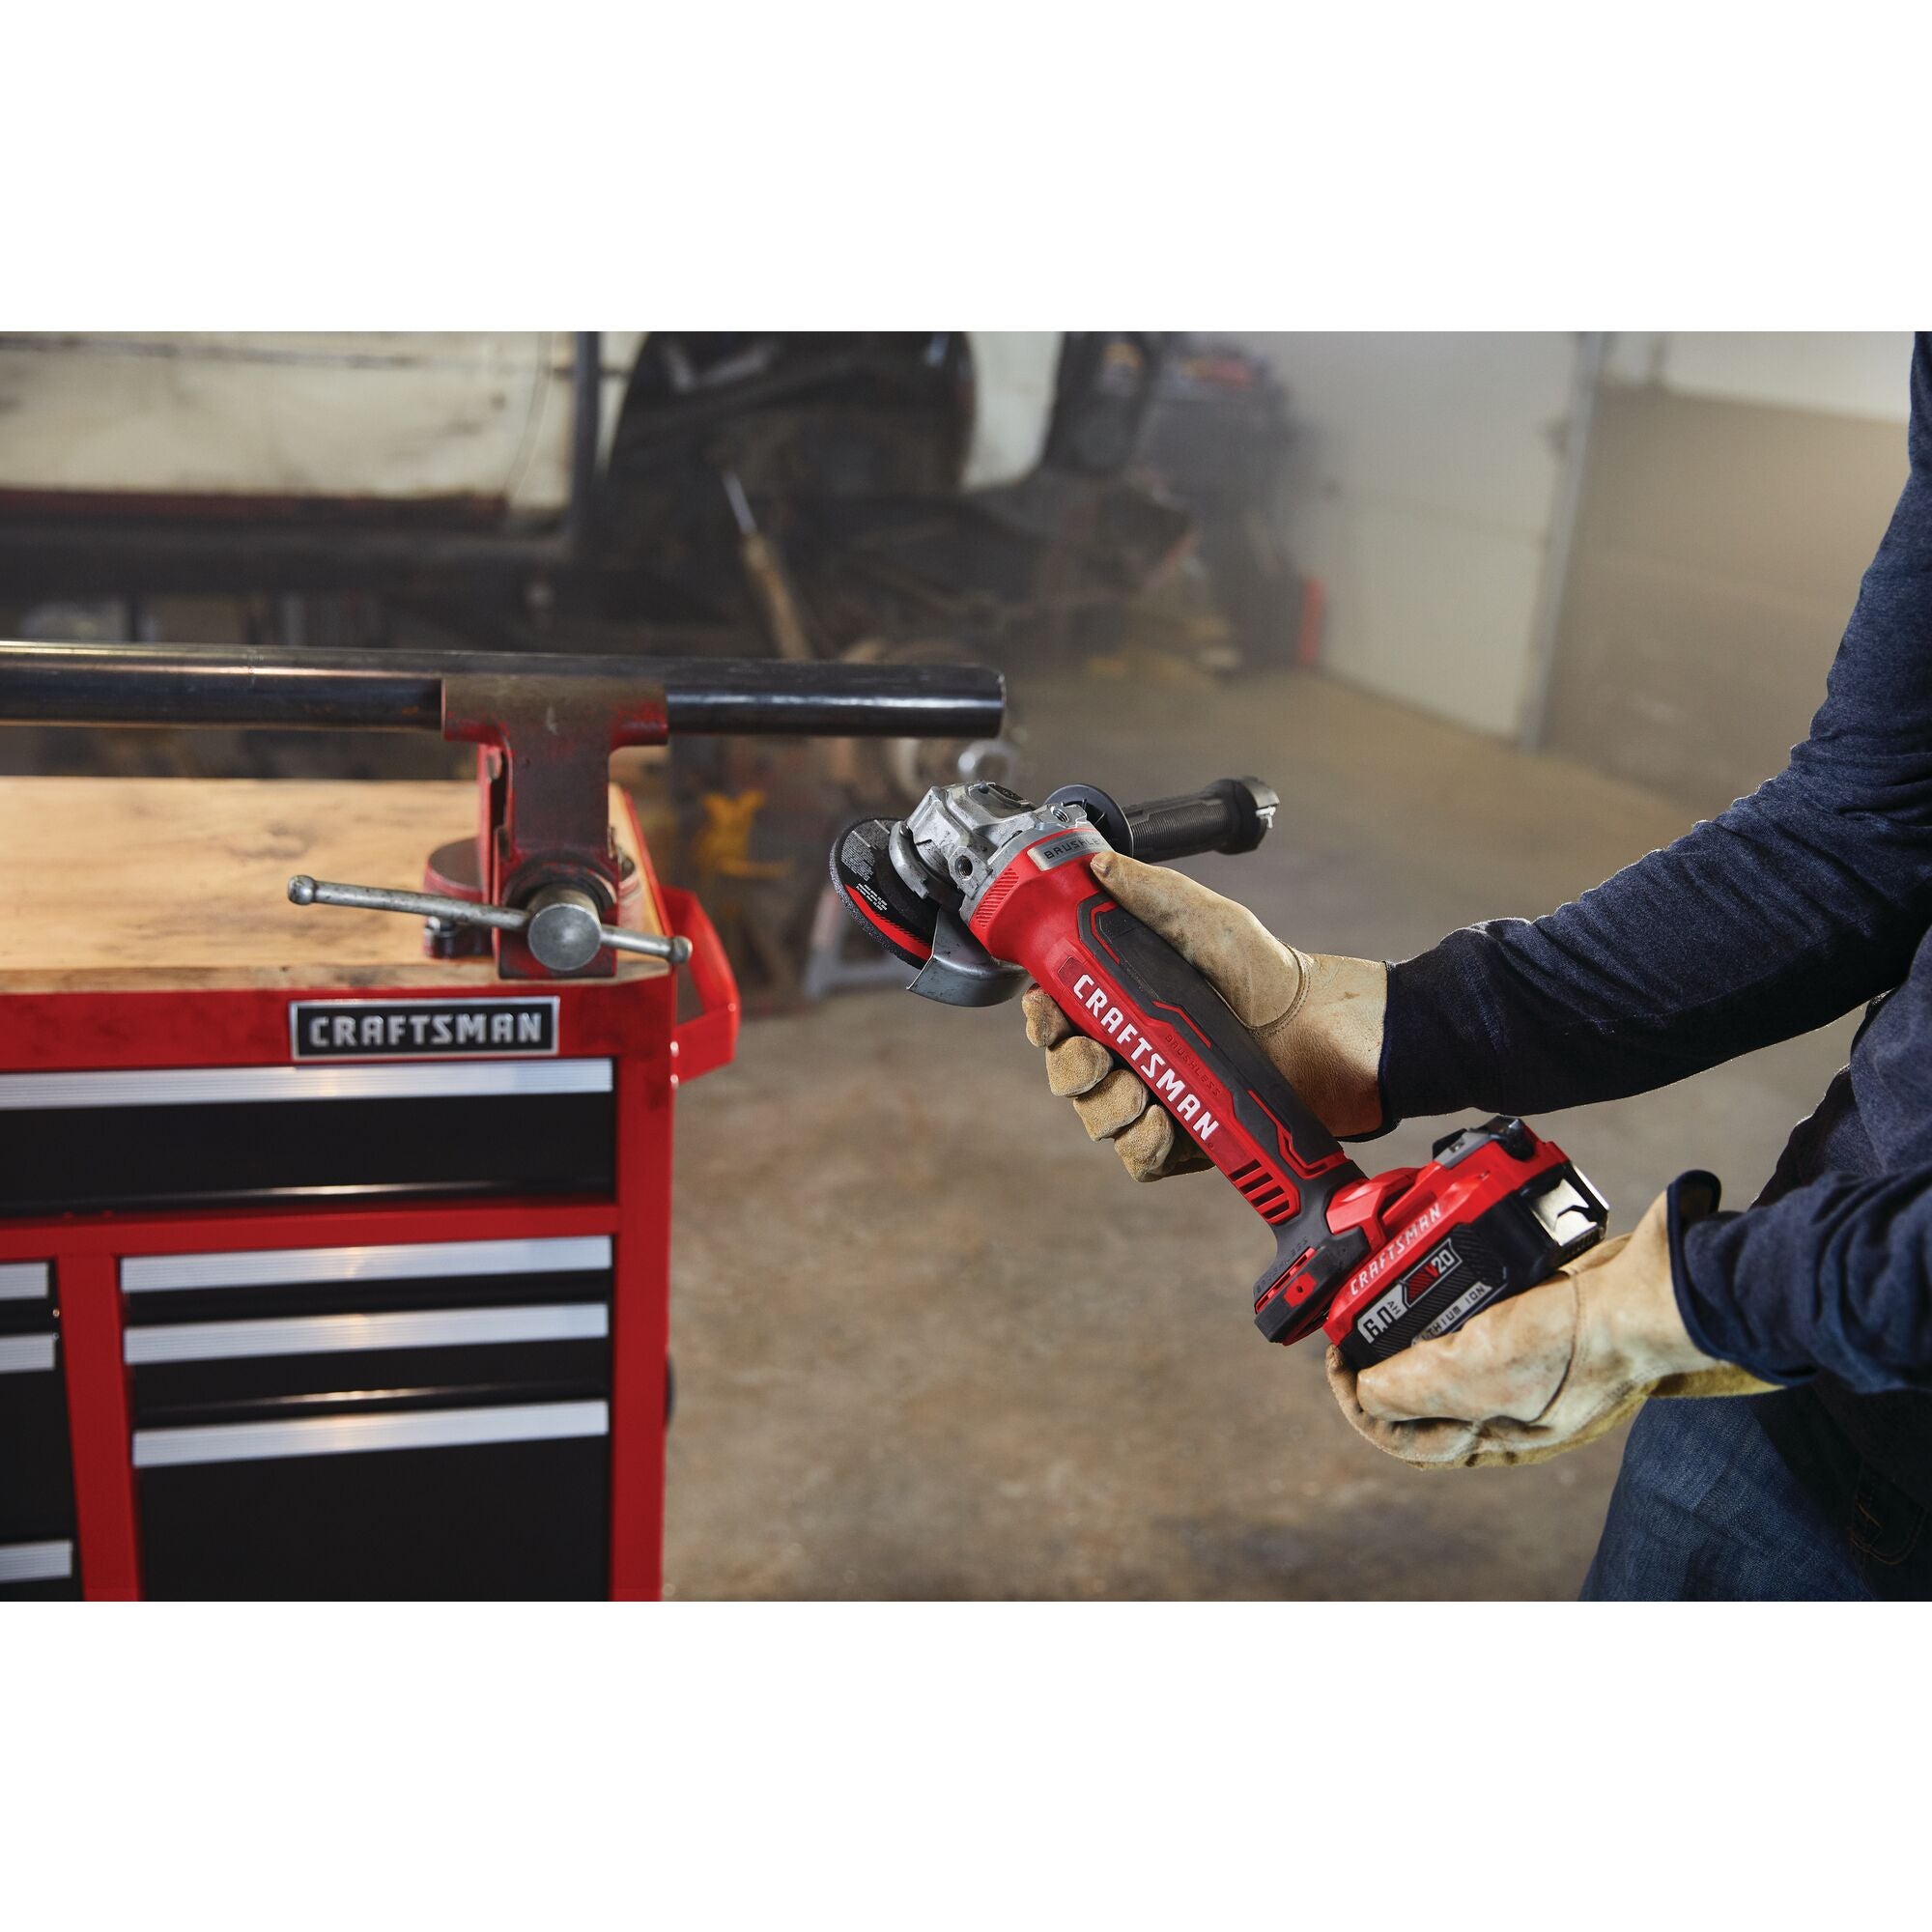 View of CRAFTSMAN Angle Grinder  being used by consumer